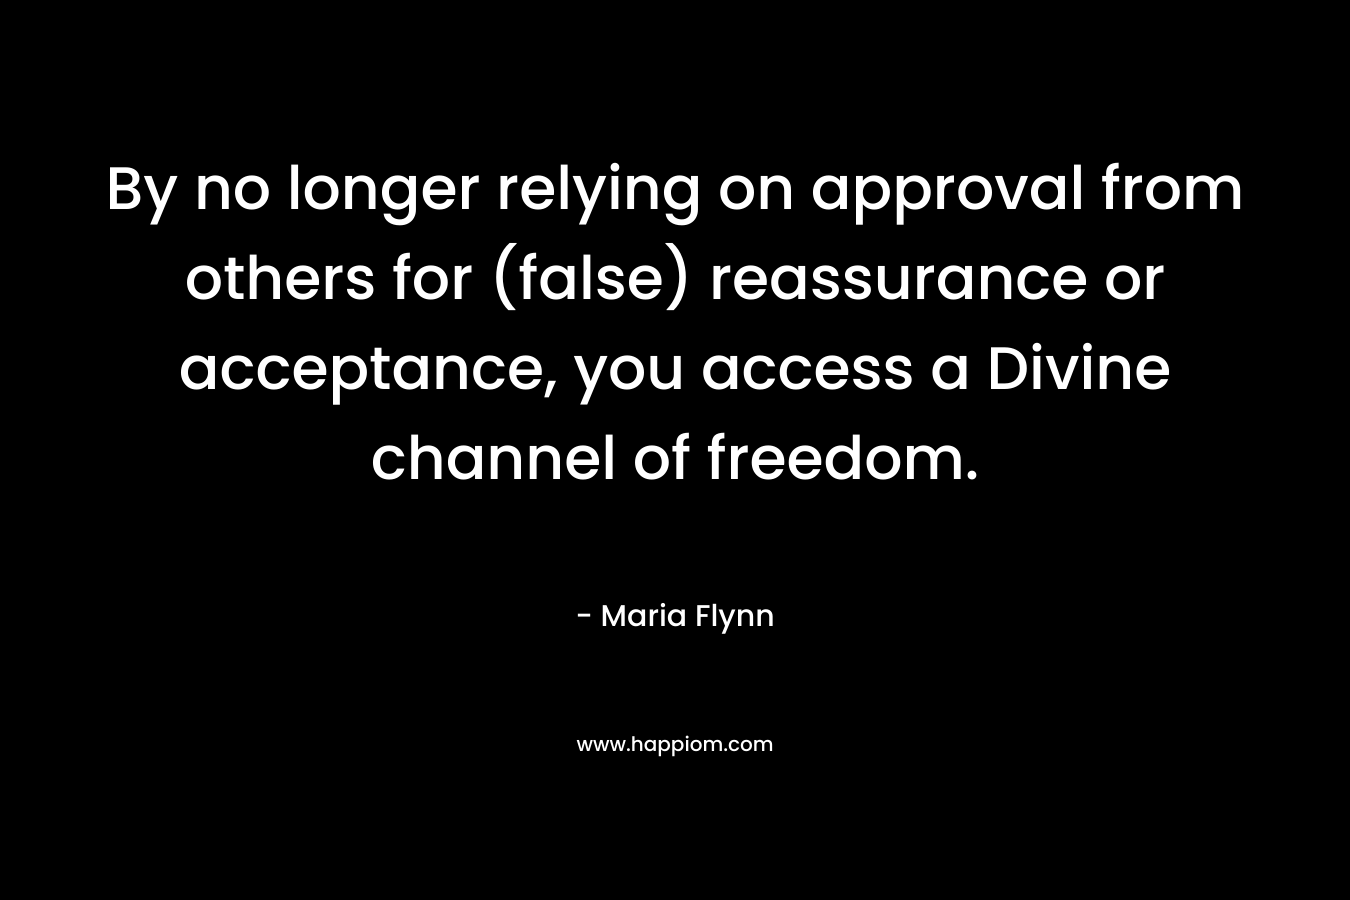 By no longer relying on approval from others for (false) reassurance or acceptance, you access a Divine channel of freedom. – Maria Flynn